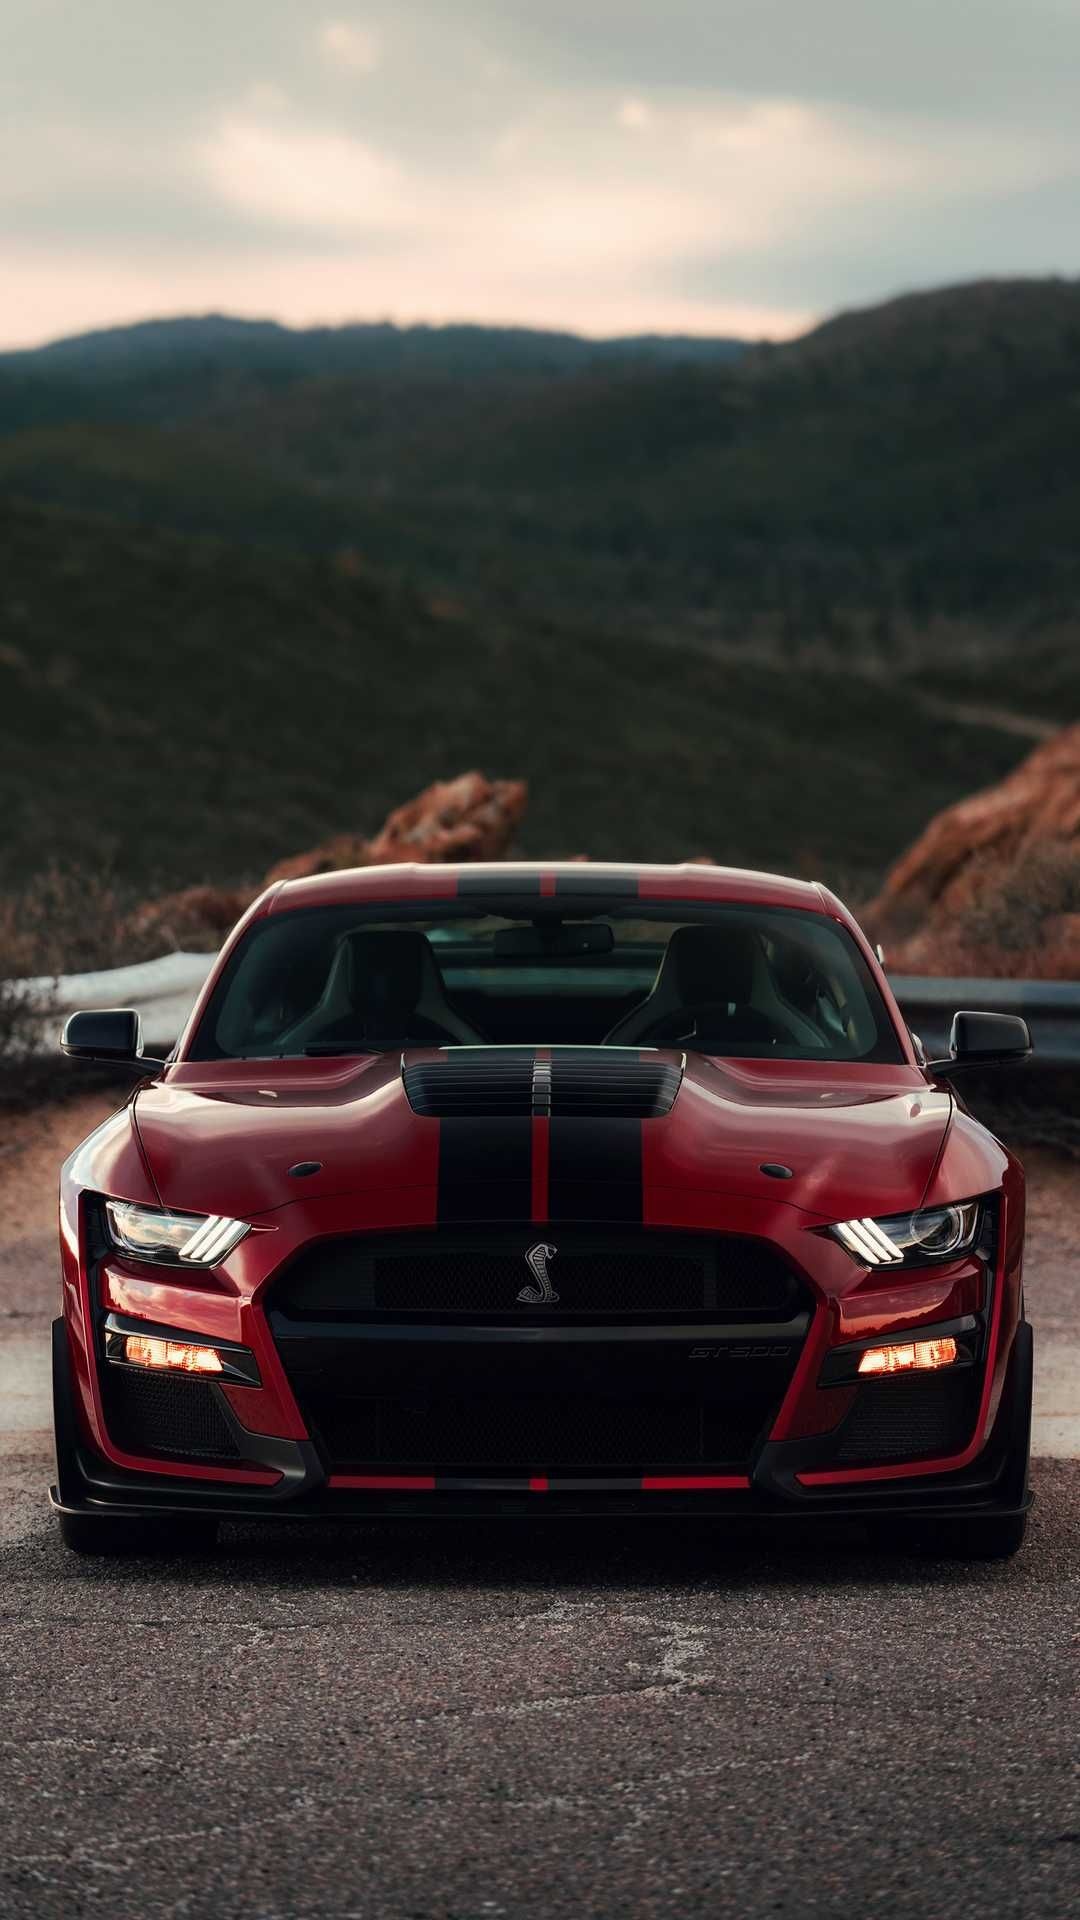 GT500 power, Ford Mustang Shelby GT500, Ford Mustang wallpaper, Ford Mustang GT500 beauty, 1080x1920 Full HD Phone